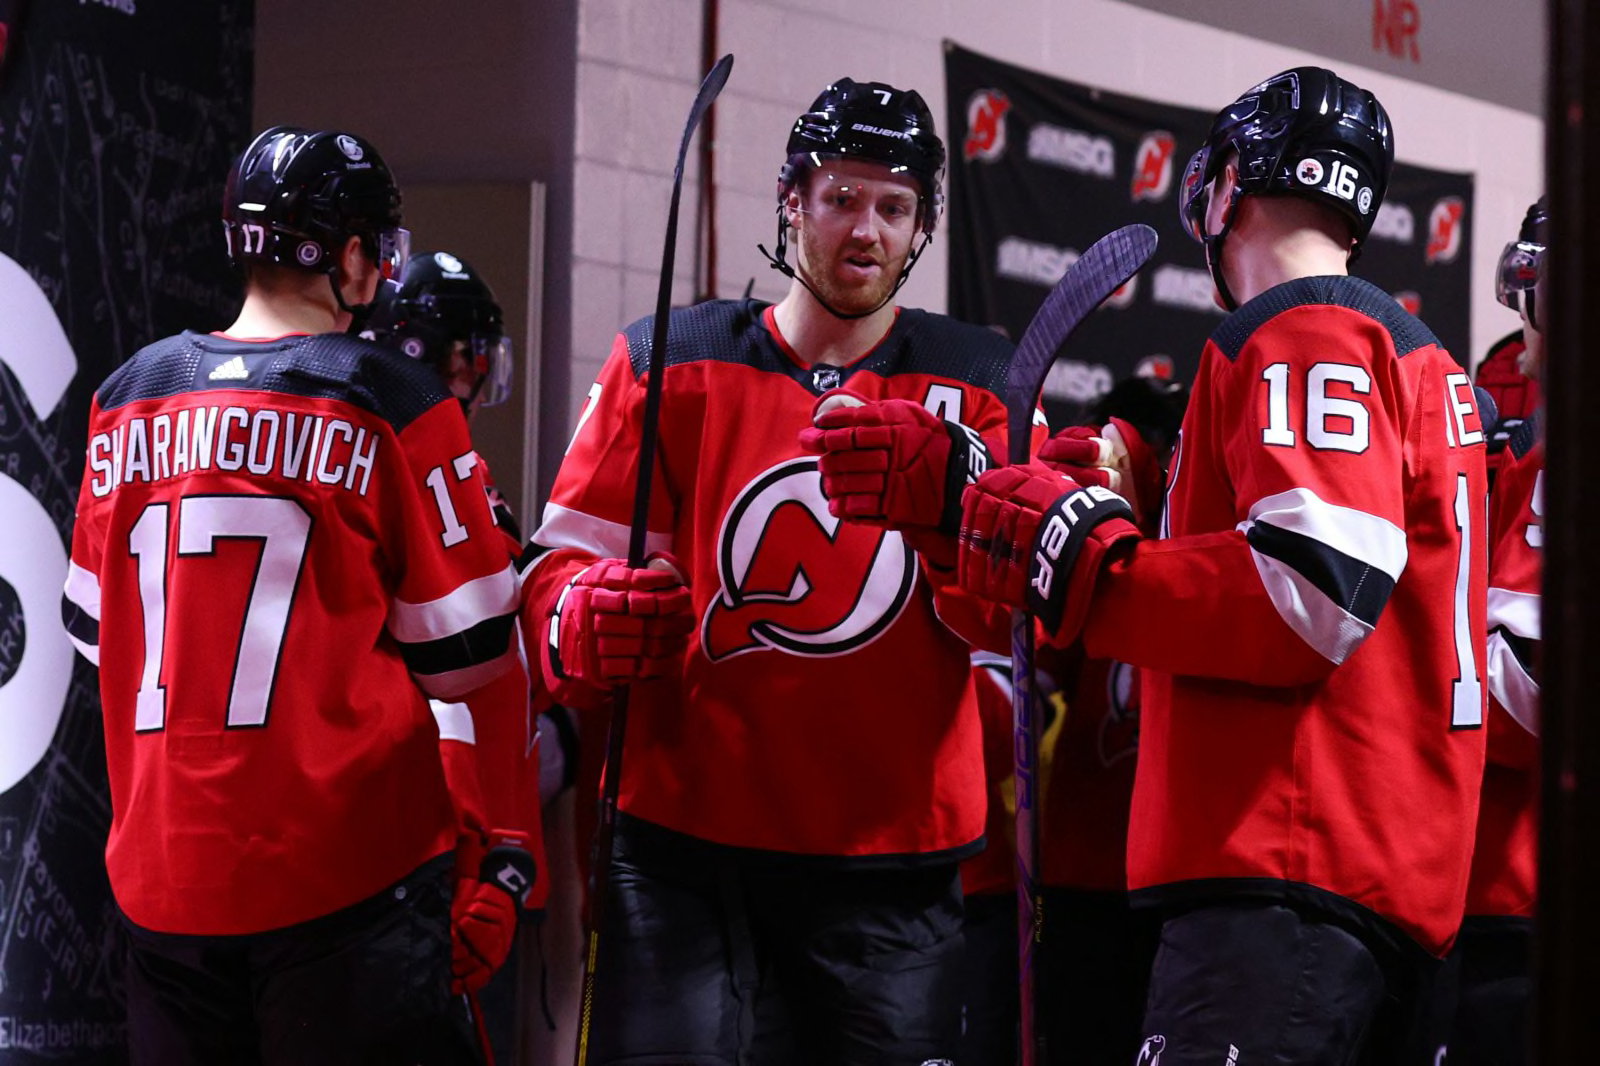 What We Learned: New Jersey Devils primed for a strong summer